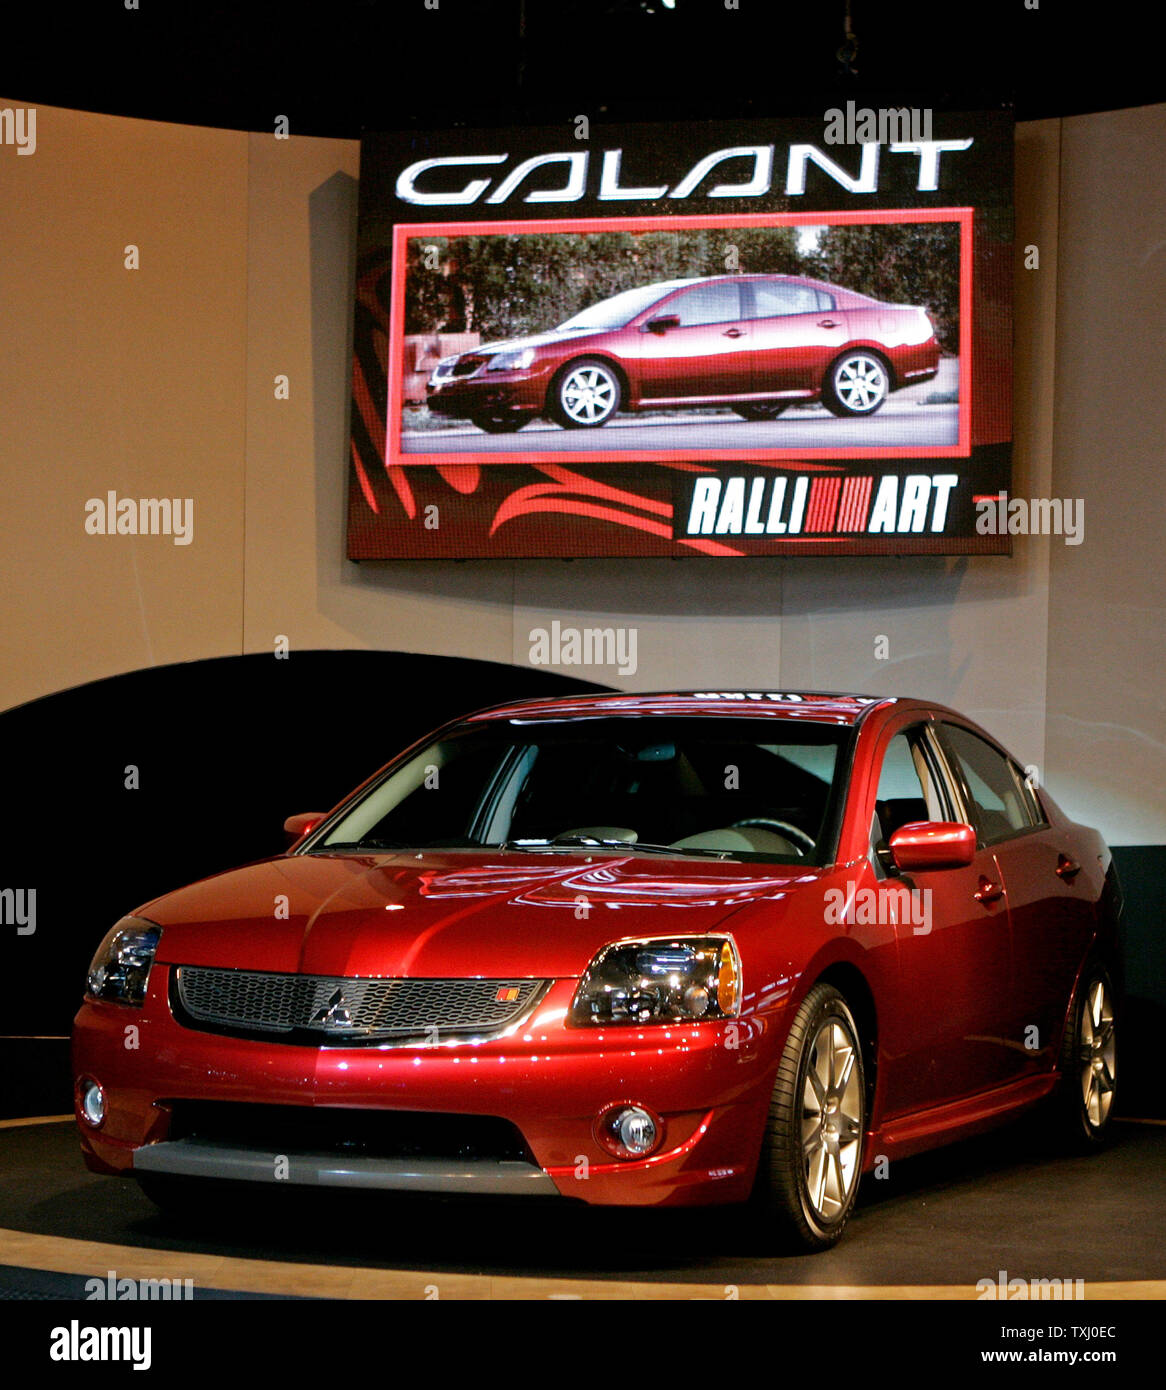 Mitsubishi introduces the 2007 Galant Ralliart edition at the 2006 Chicago Auto Show on February 8, 2006 at McCormick Place in Chicago. (UPI Photo/Brian Kersey) Stock Photo